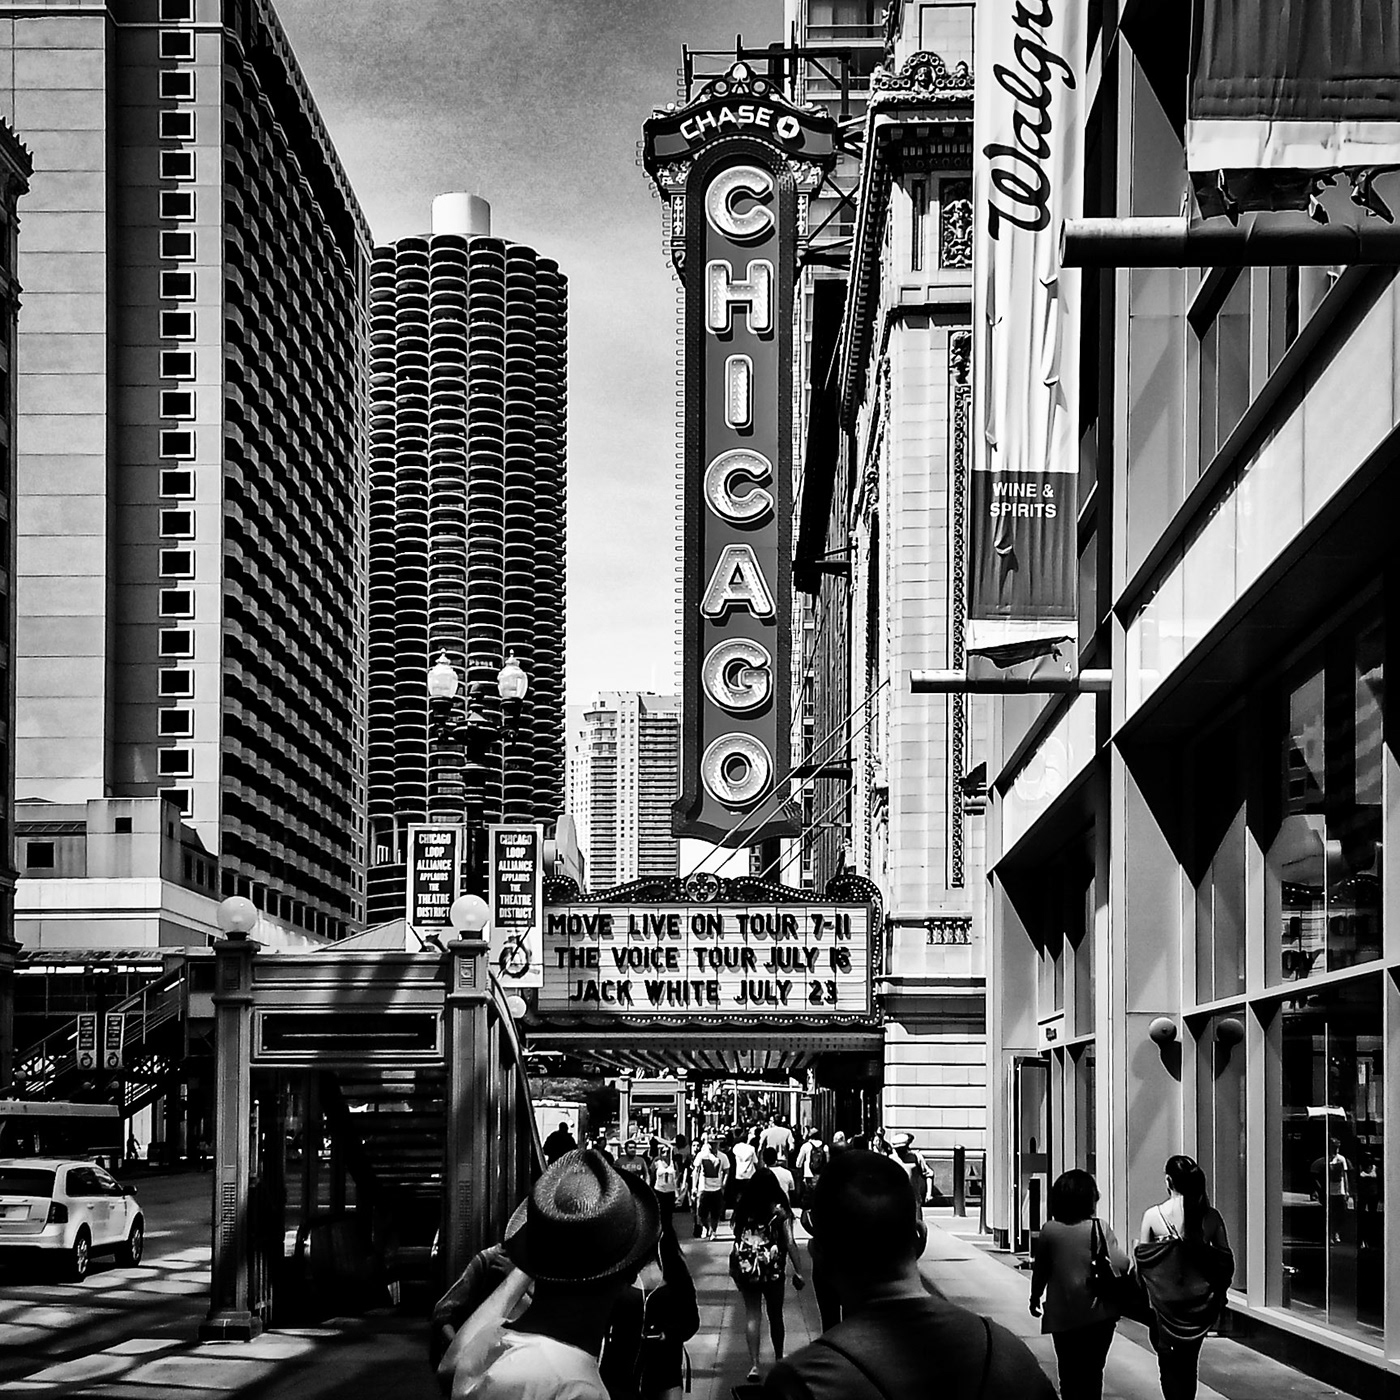 architecture black and white city life people Photography  Street street photography Urban